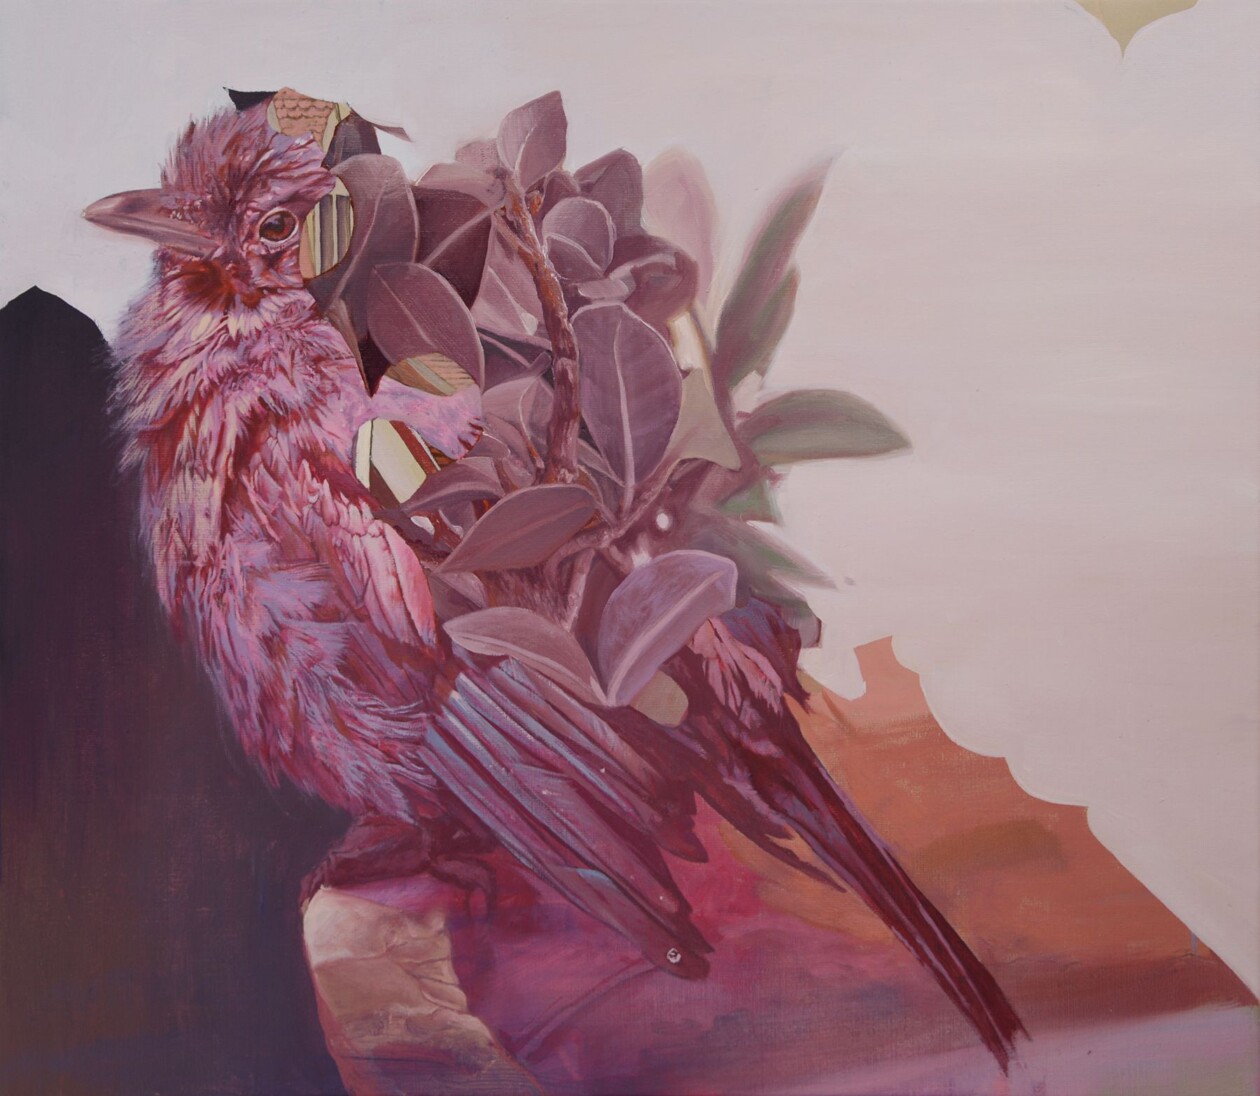 Worlds Within Worlds, The Collaborative Surrealism Of Telmo Miel (5)